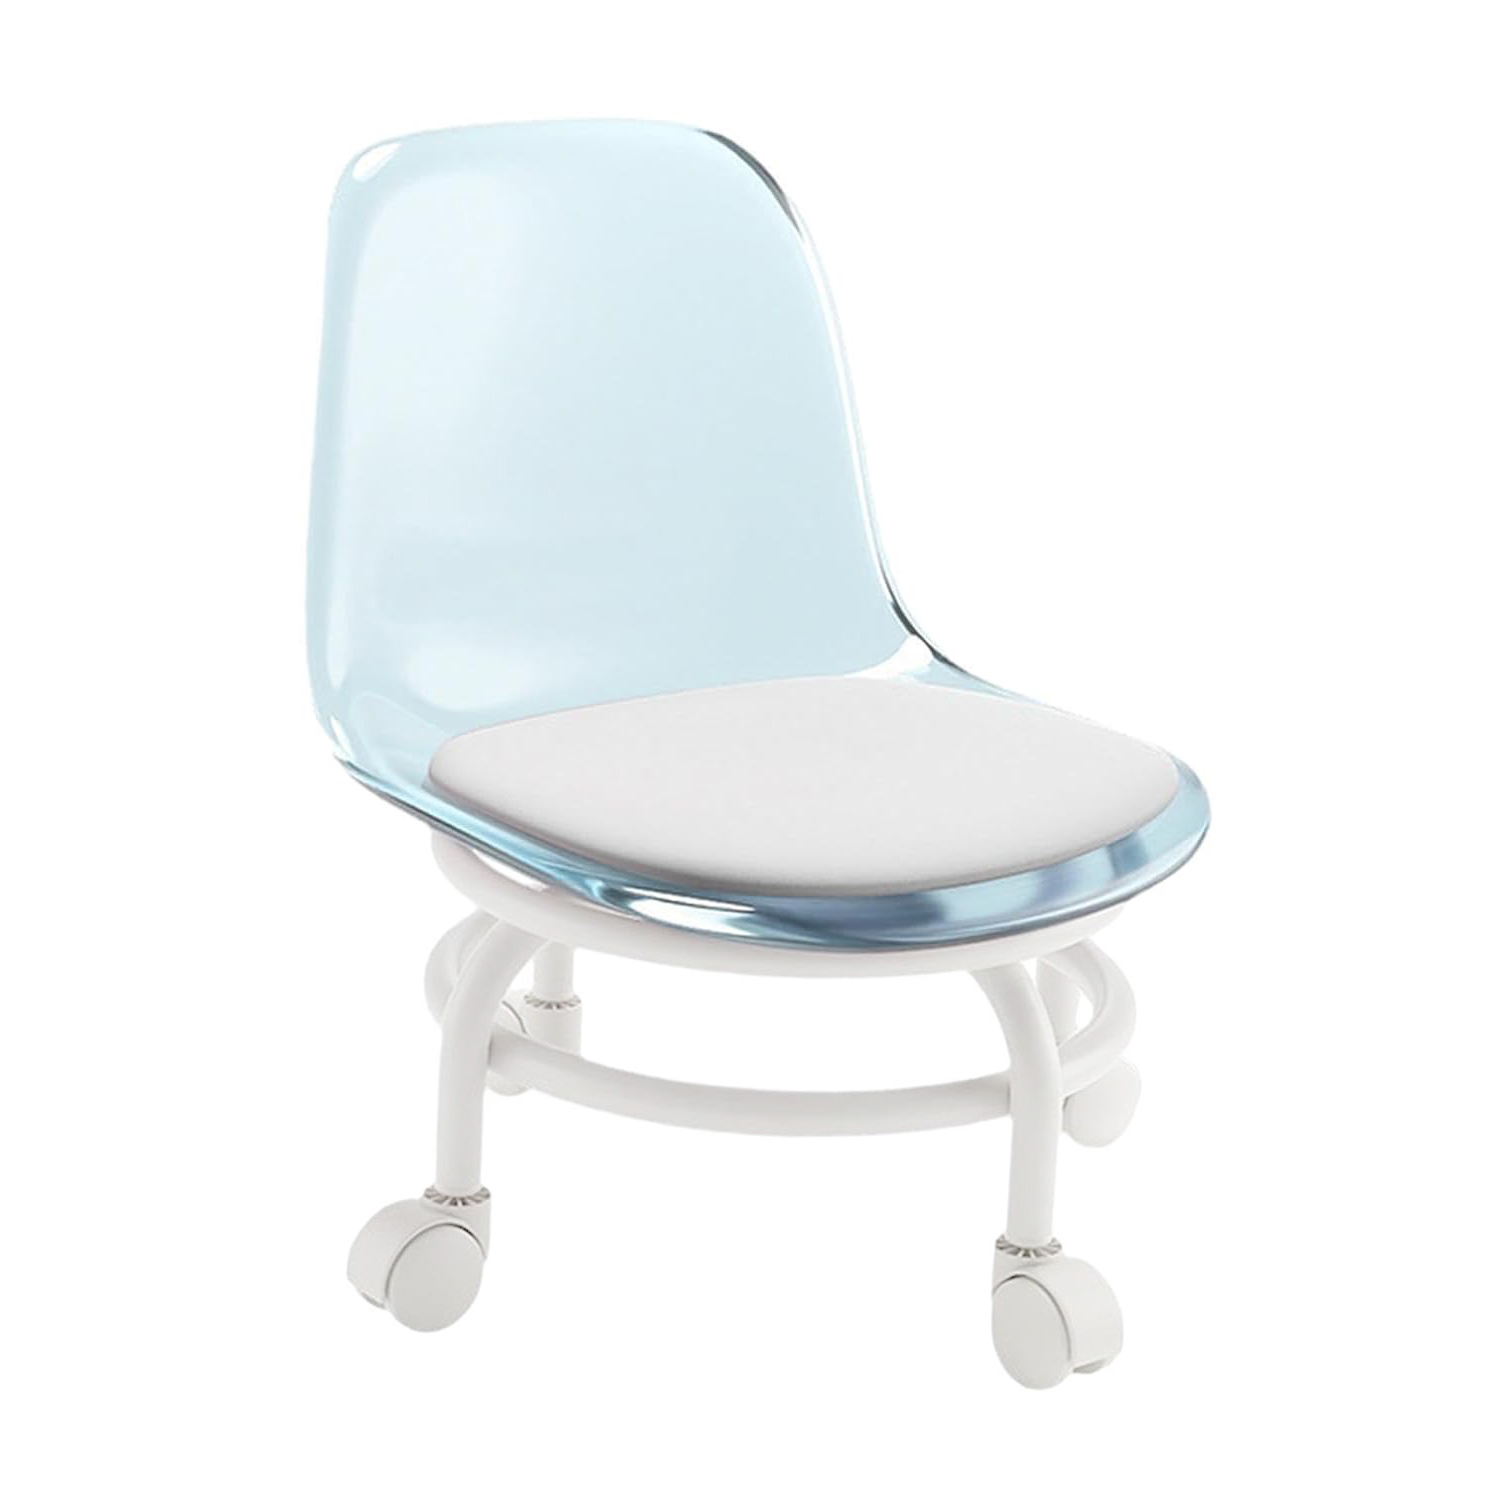 Salon Chair - Salon spa Chair with Back Support